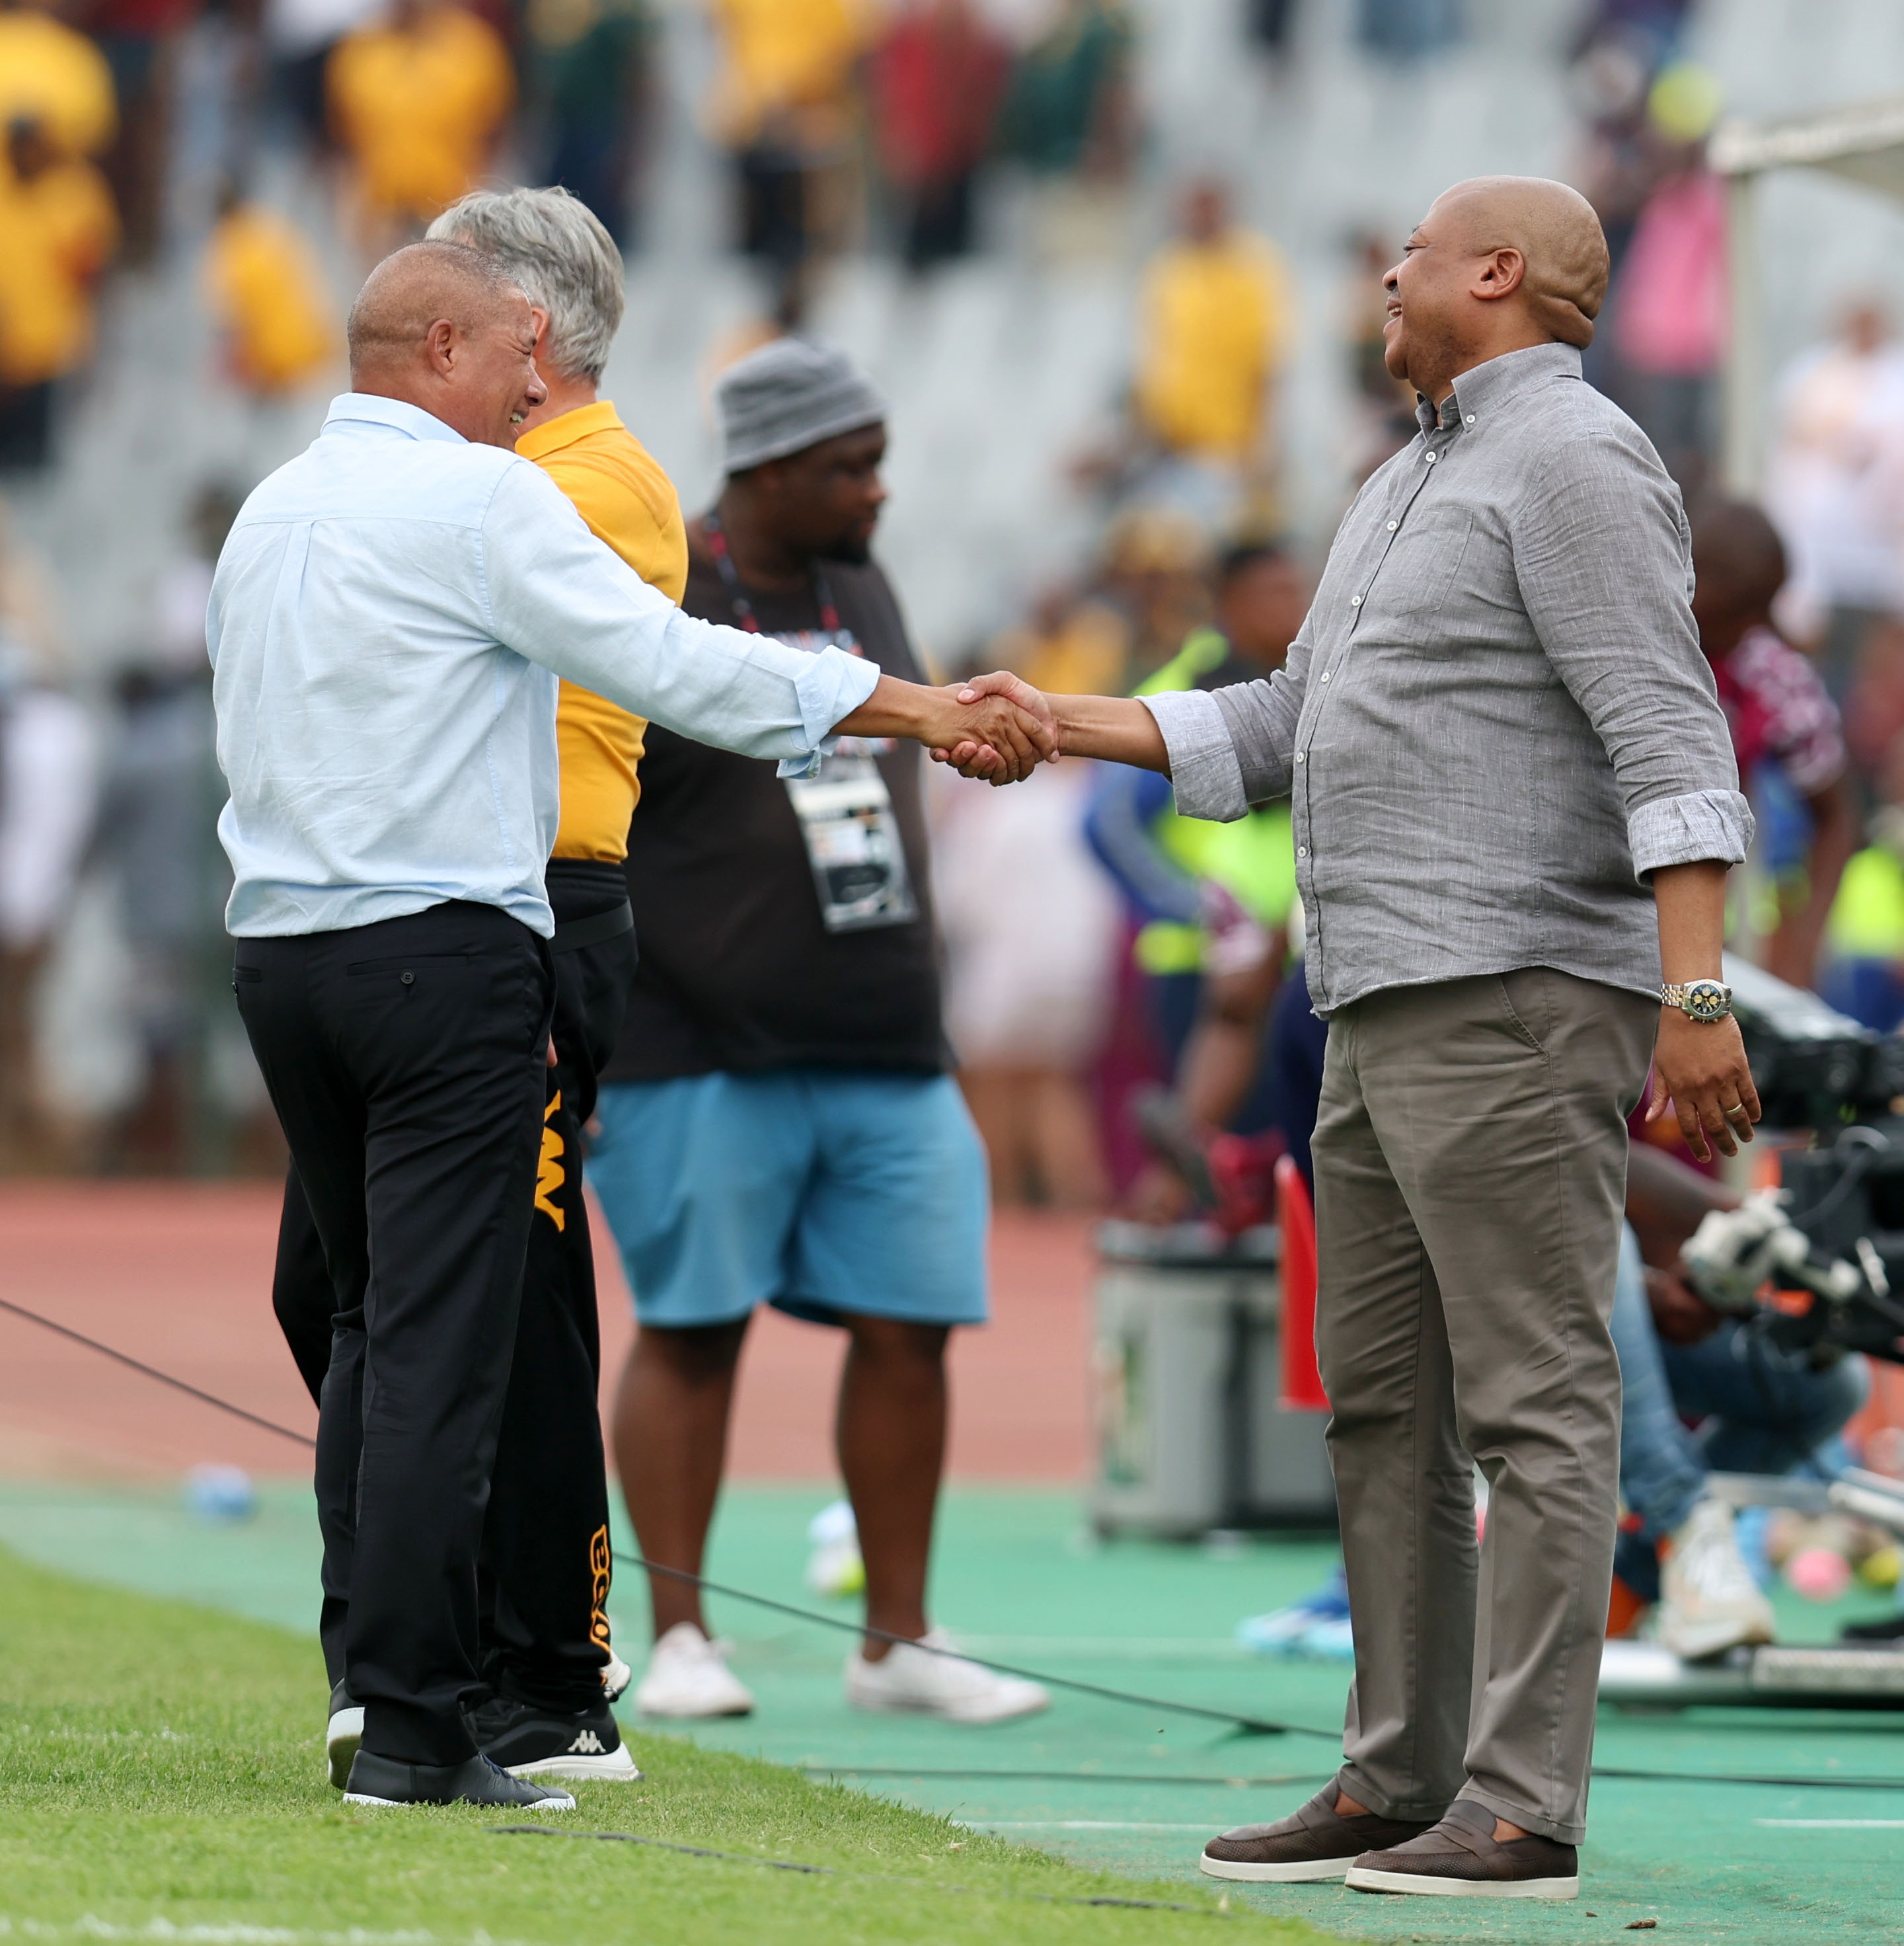 Stylianou: The First Thing To Do For Chiefs...